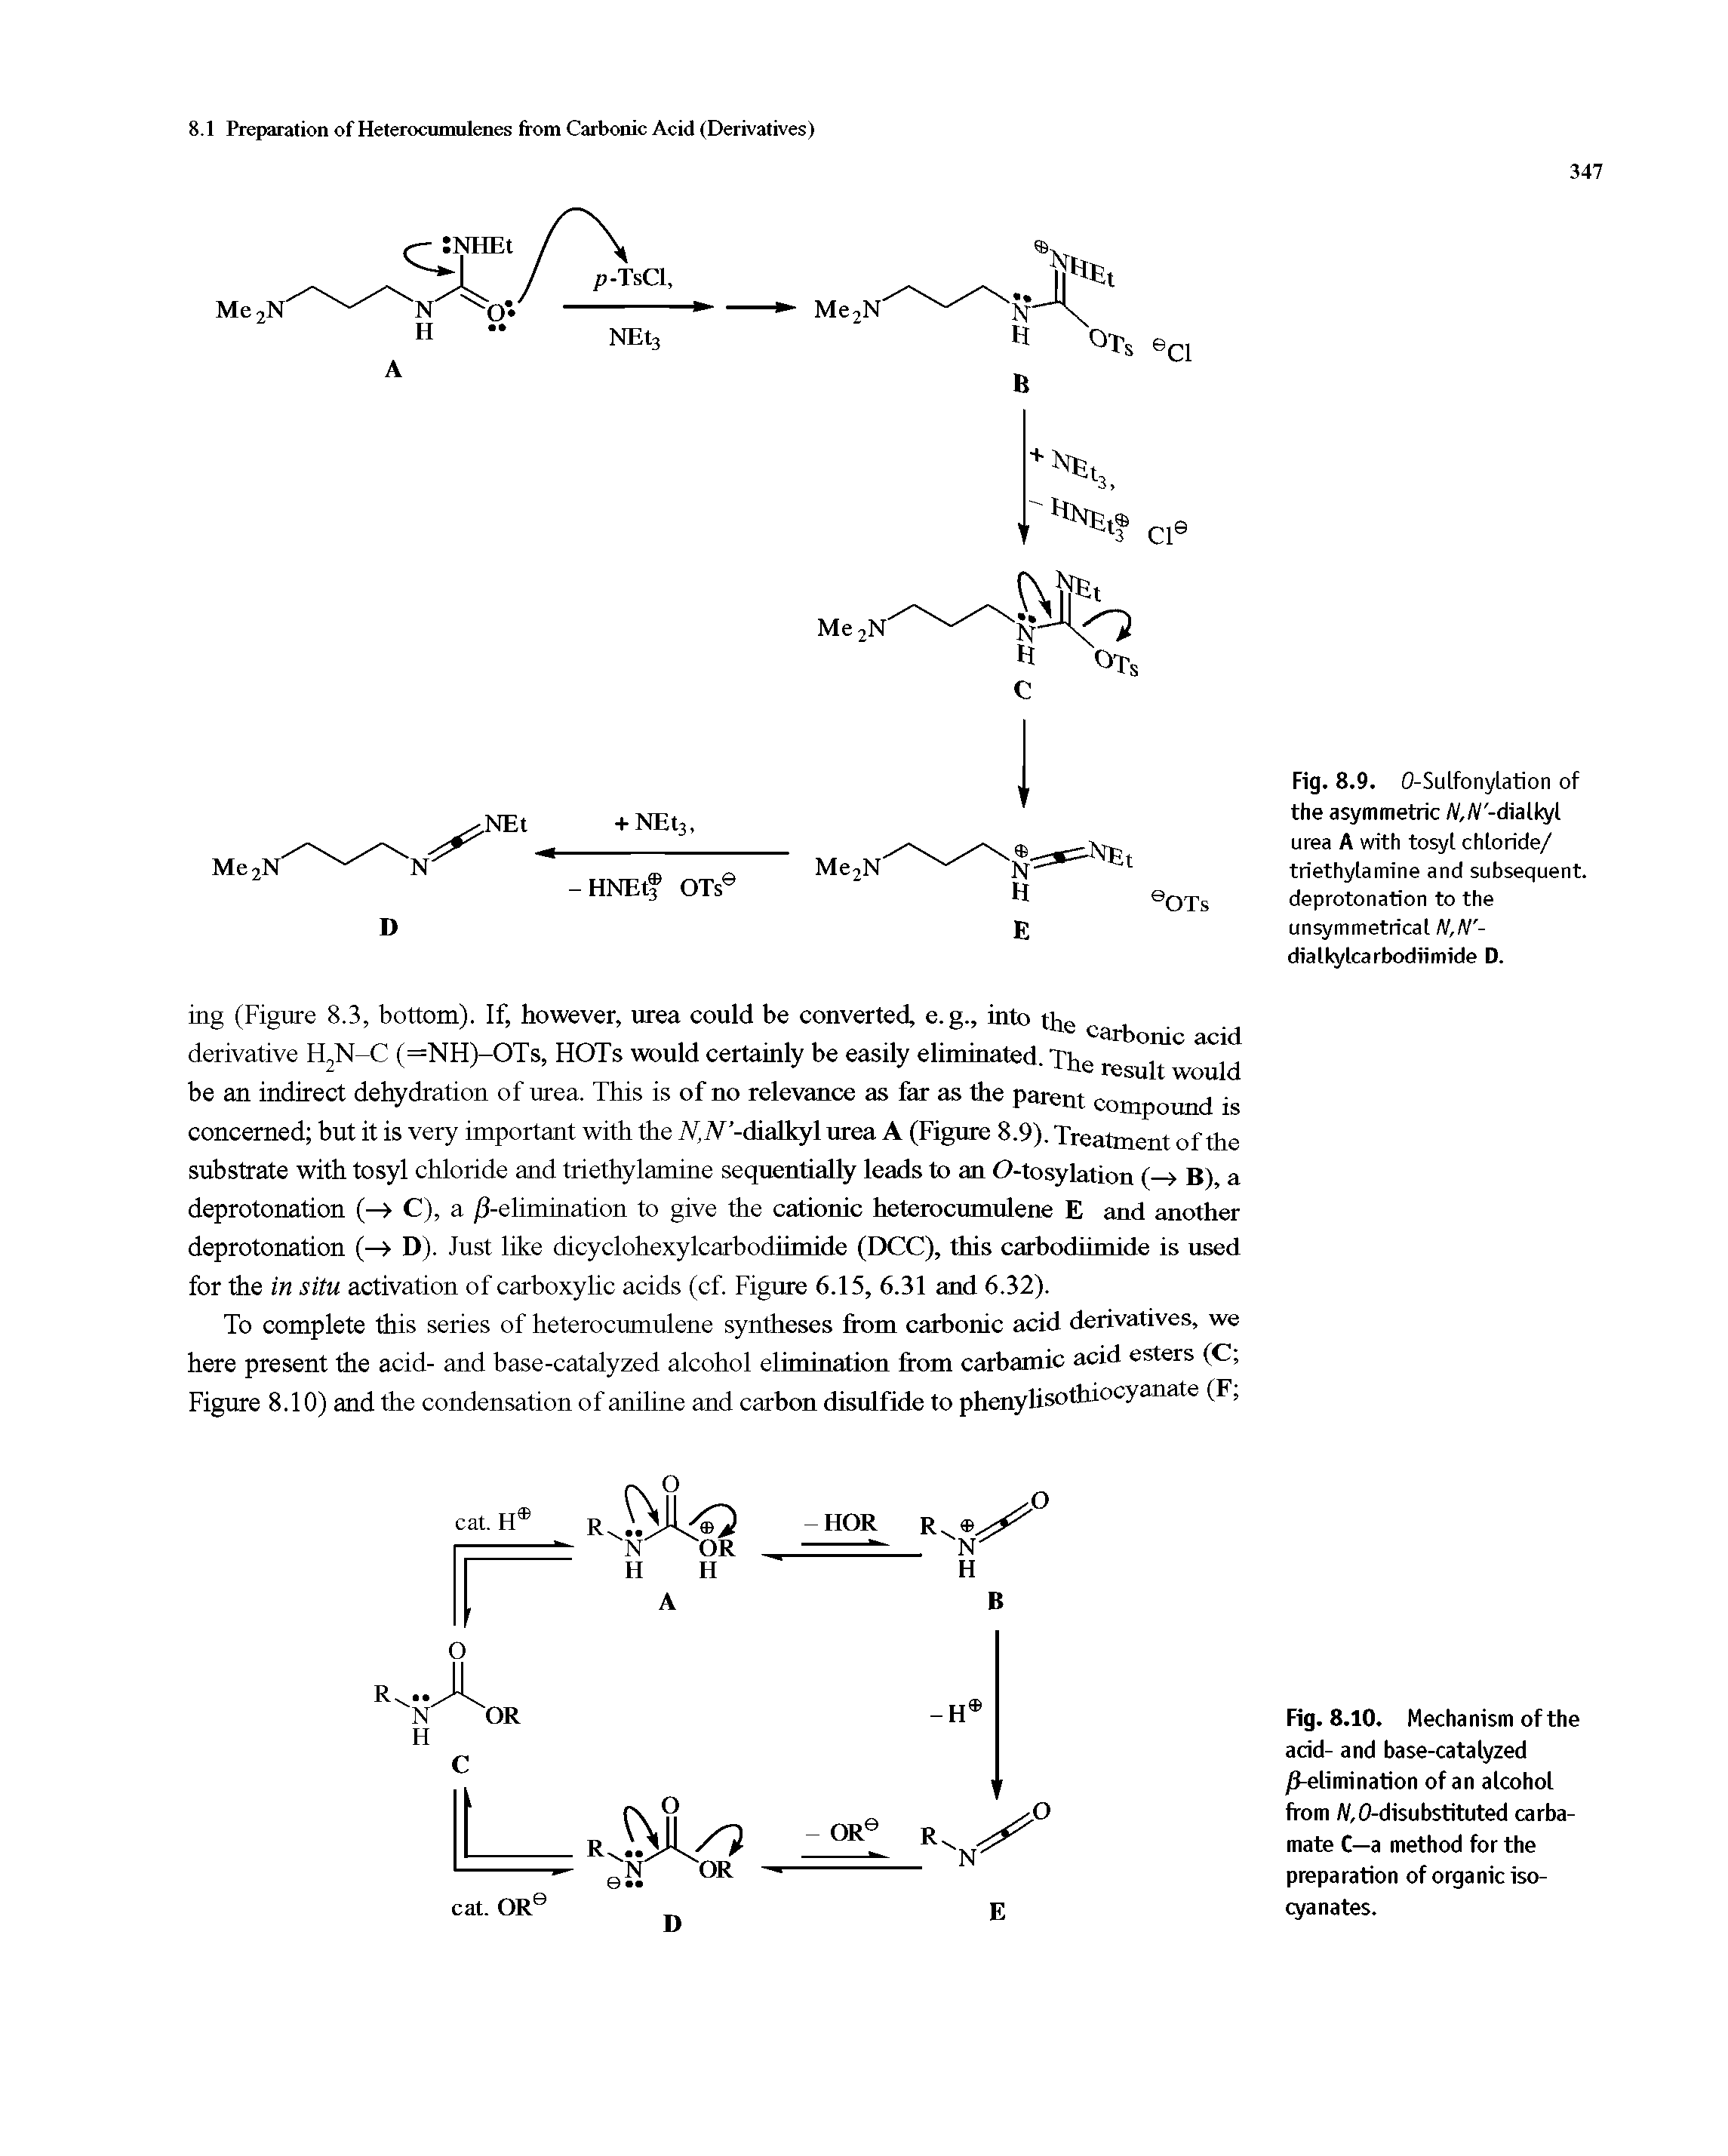 Fig. 8.9. O-Sulfonylation of the asymmetric /V,A/-dialkyl urea A with tosyl chloride/ triethylamine and subsequent, deprotonation to the unsymmetrical N,N dialkylcarbodiimide D.